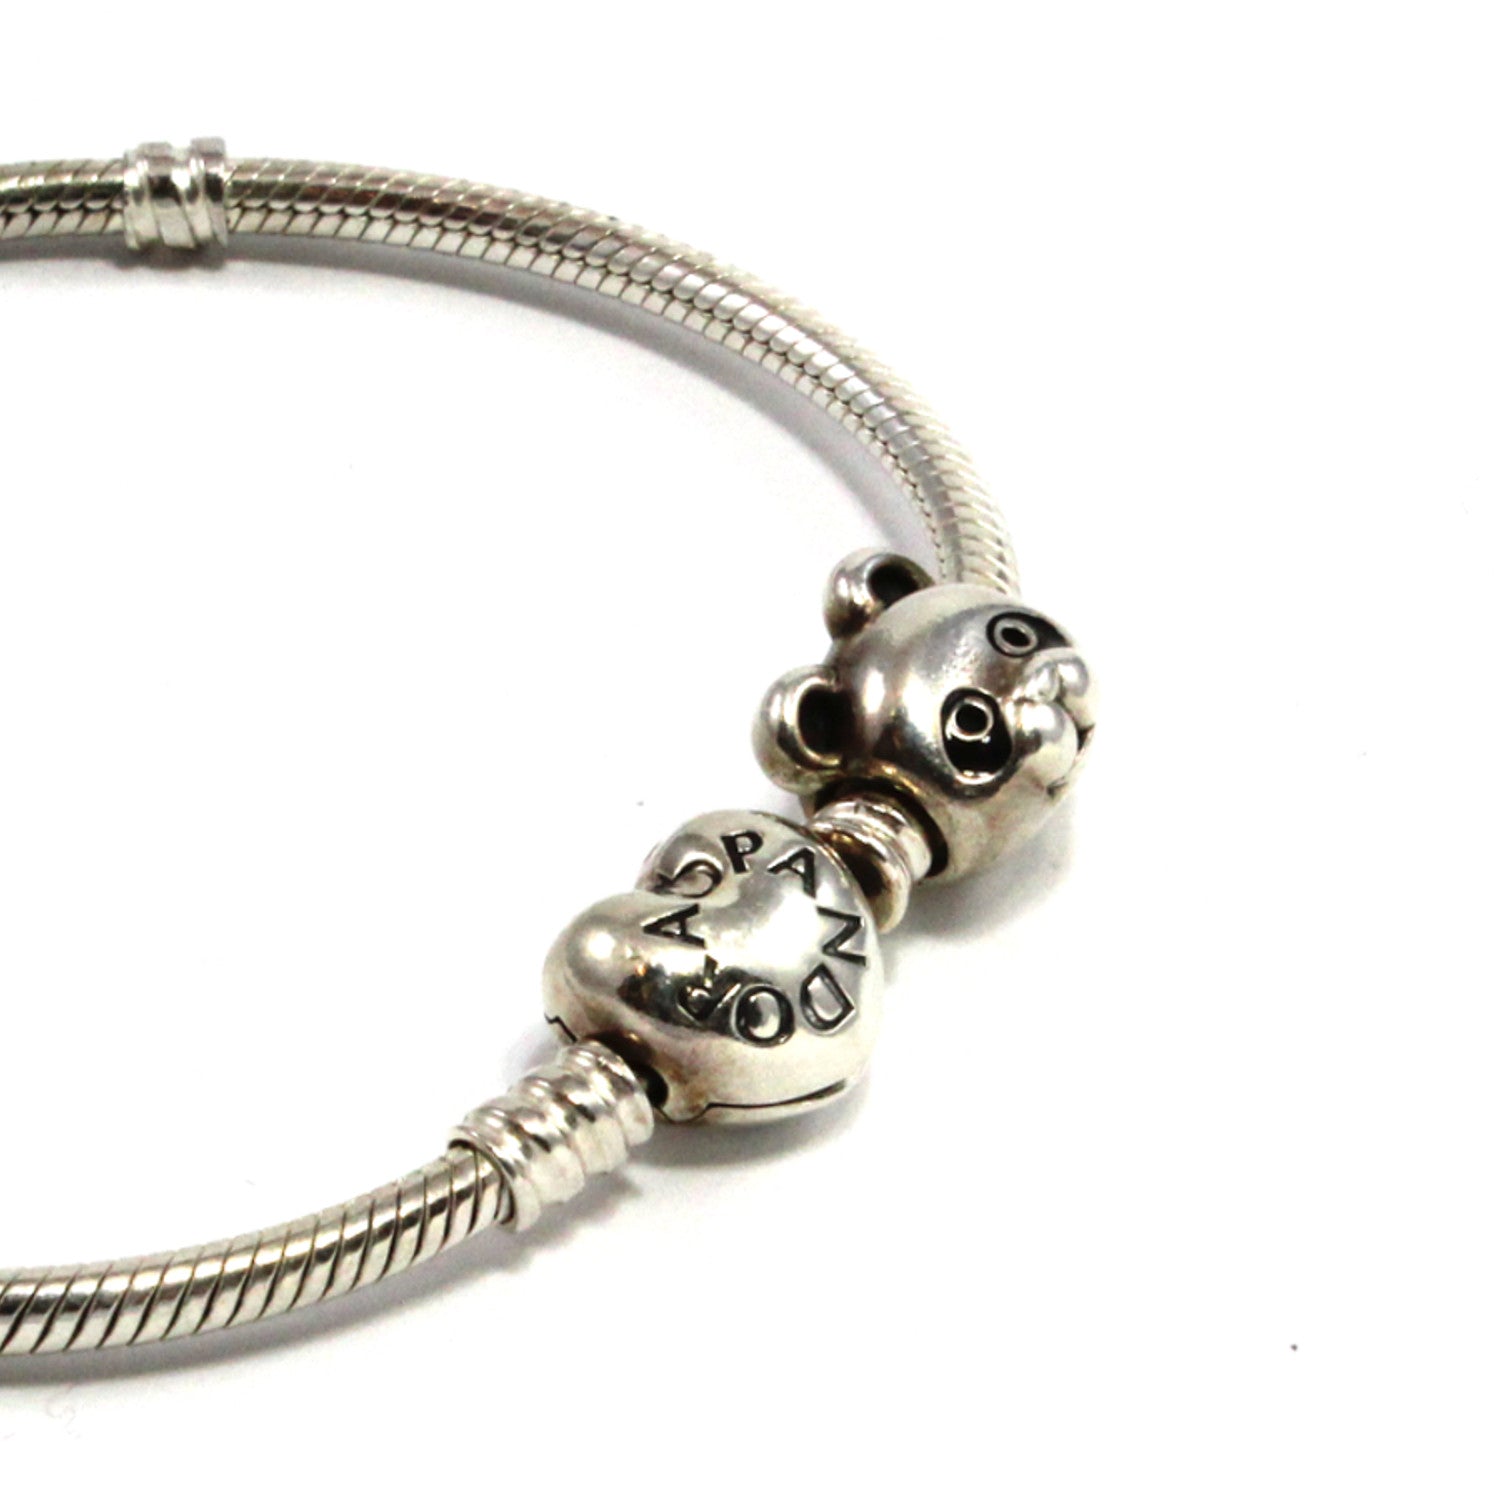 Limited Edition Sterling Silver Bangle